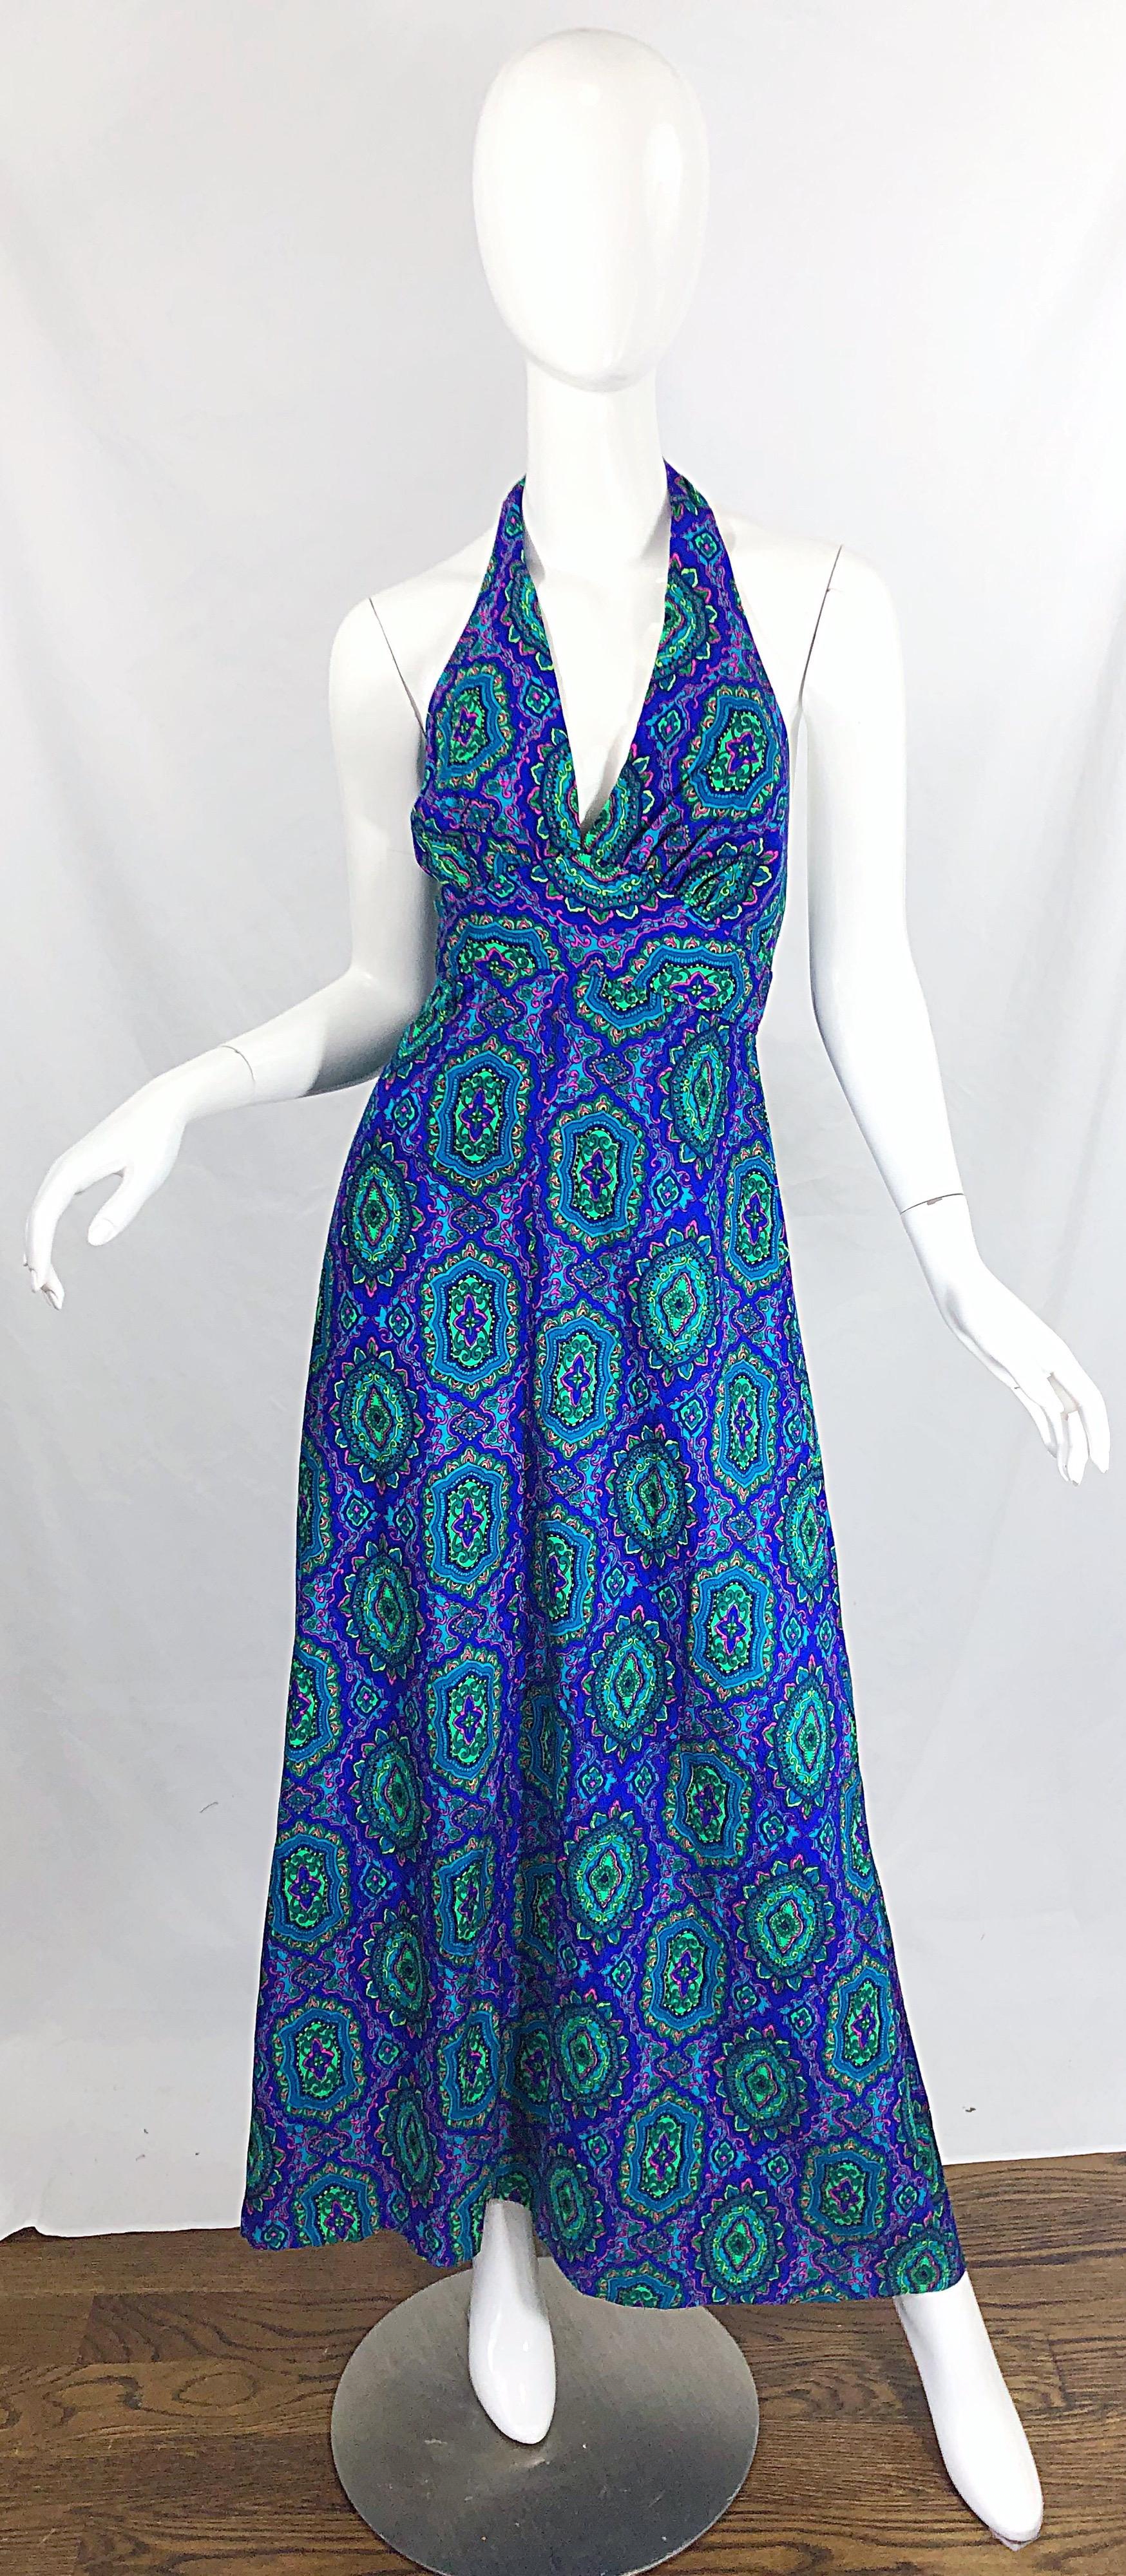 Stylish vintage 1970s paisley halter maxi dress ! Features a paisley print with voibrant colors of purple, green, blue, pink and teal throughout. Soft cotton and rayon fabric. Halter ties at the top back neck. Hidden zipper up the back with